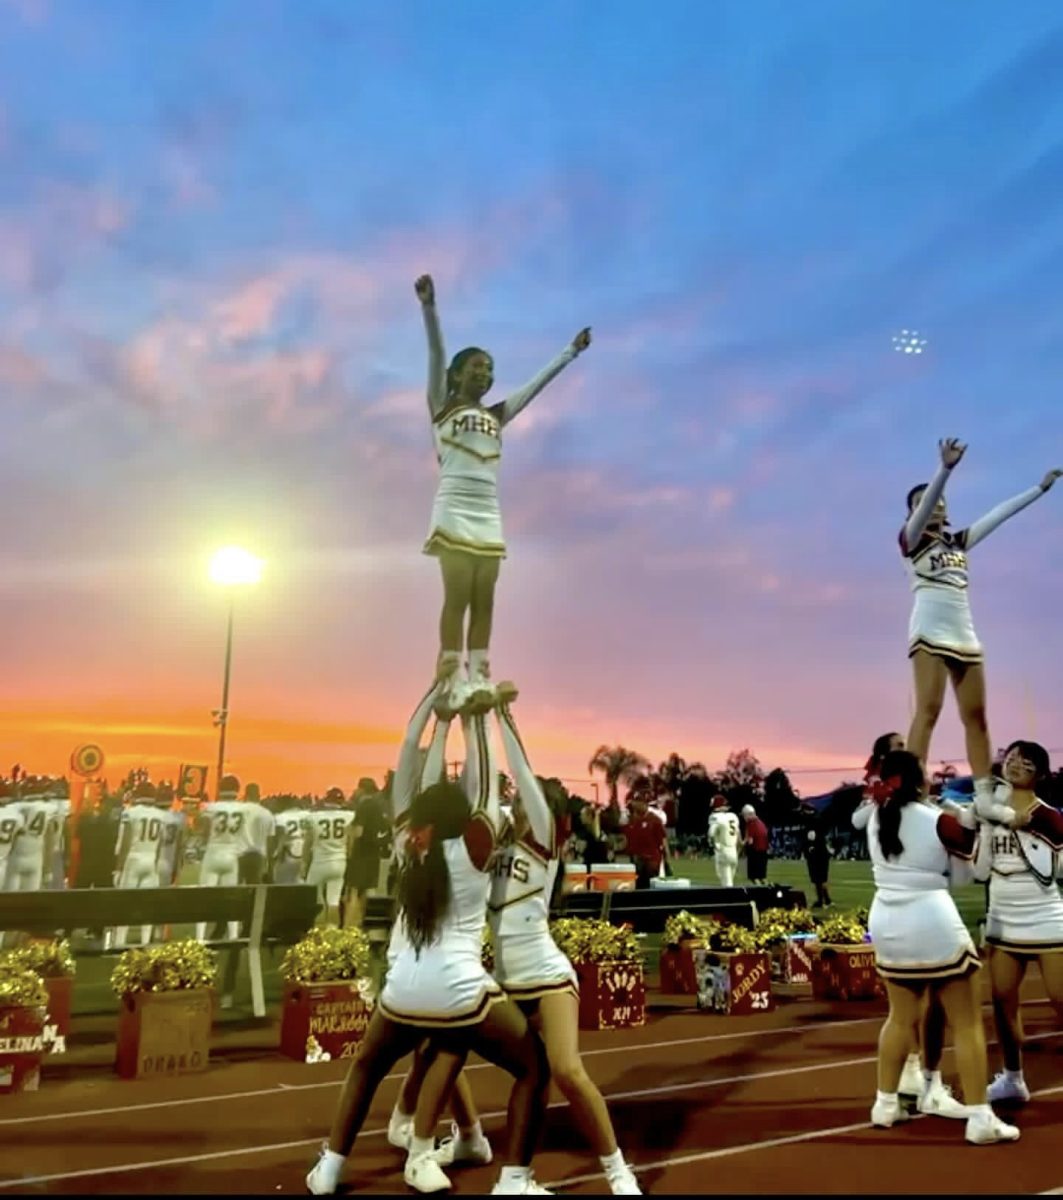 Stephanie Hernandez looks back on this moment when she pulled a stunt during the game. This specific football game was one of my favorites in the last four years because of this stunt and the sunset in the background, said senior Hernandez.